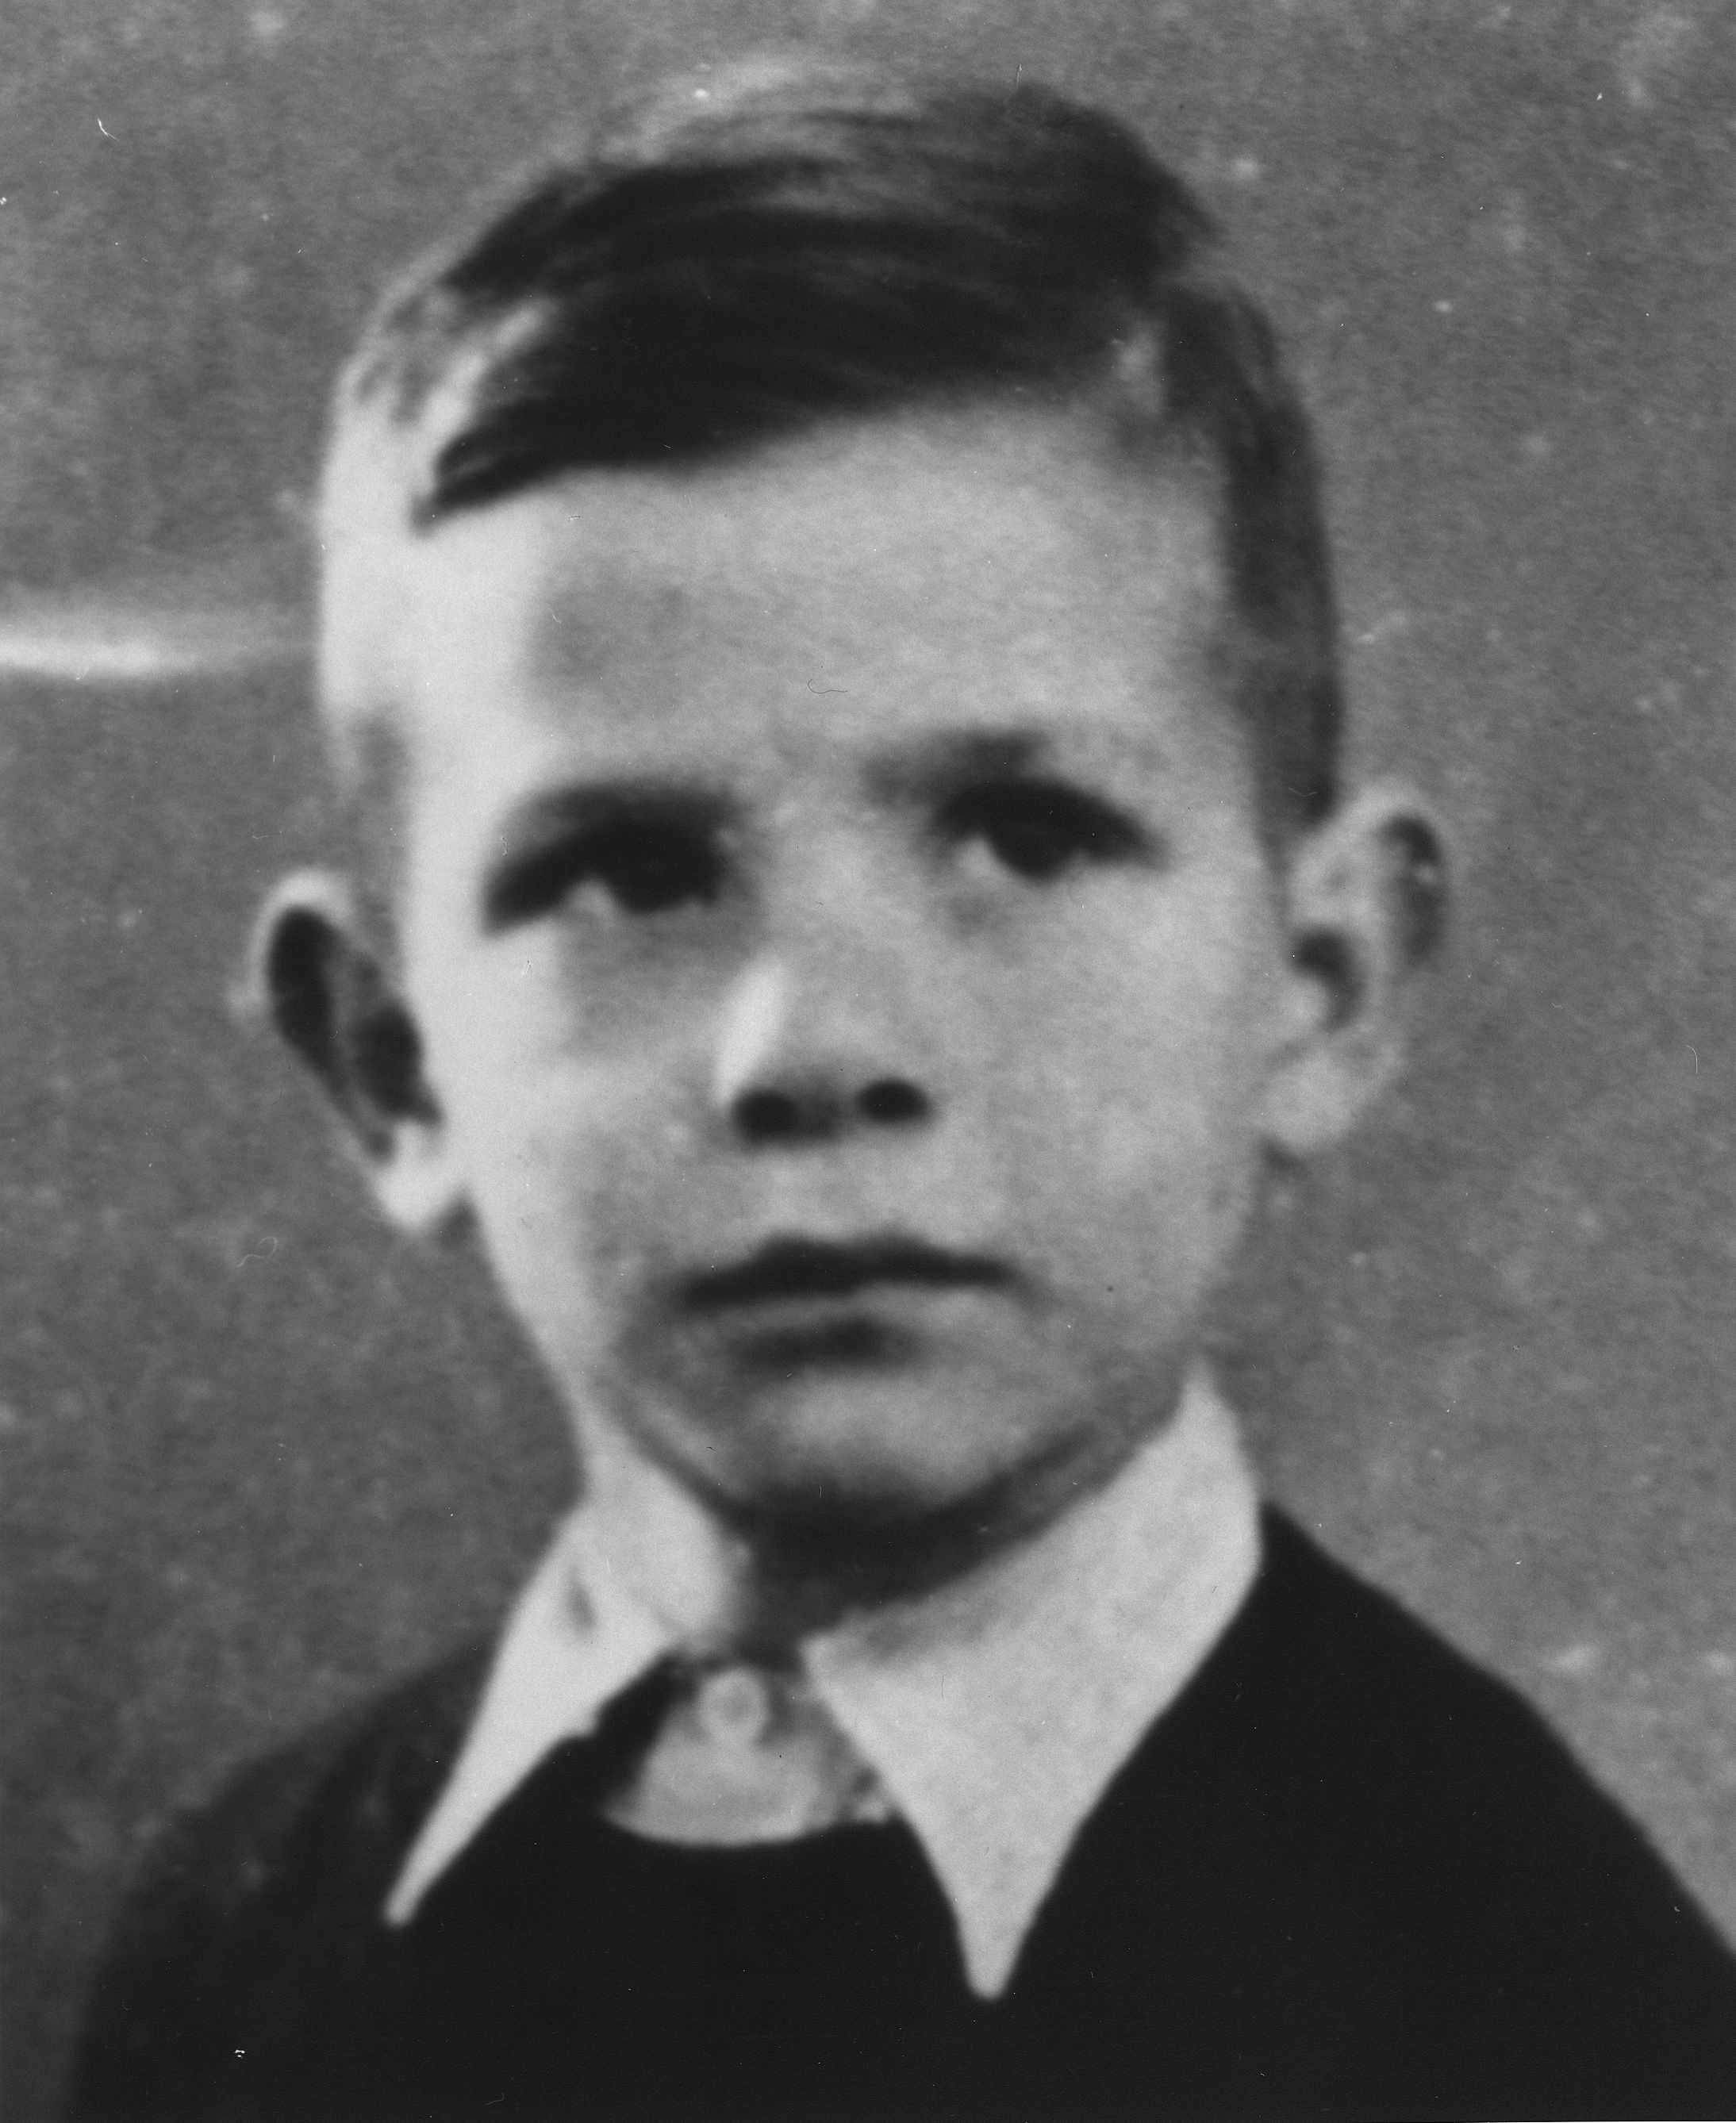 Photo: Holocaust victim Jan-Peter Pfeffer died at Auschwitz at the age of 10. Photo courtesy of the United States Holocaust Memorial Museum.